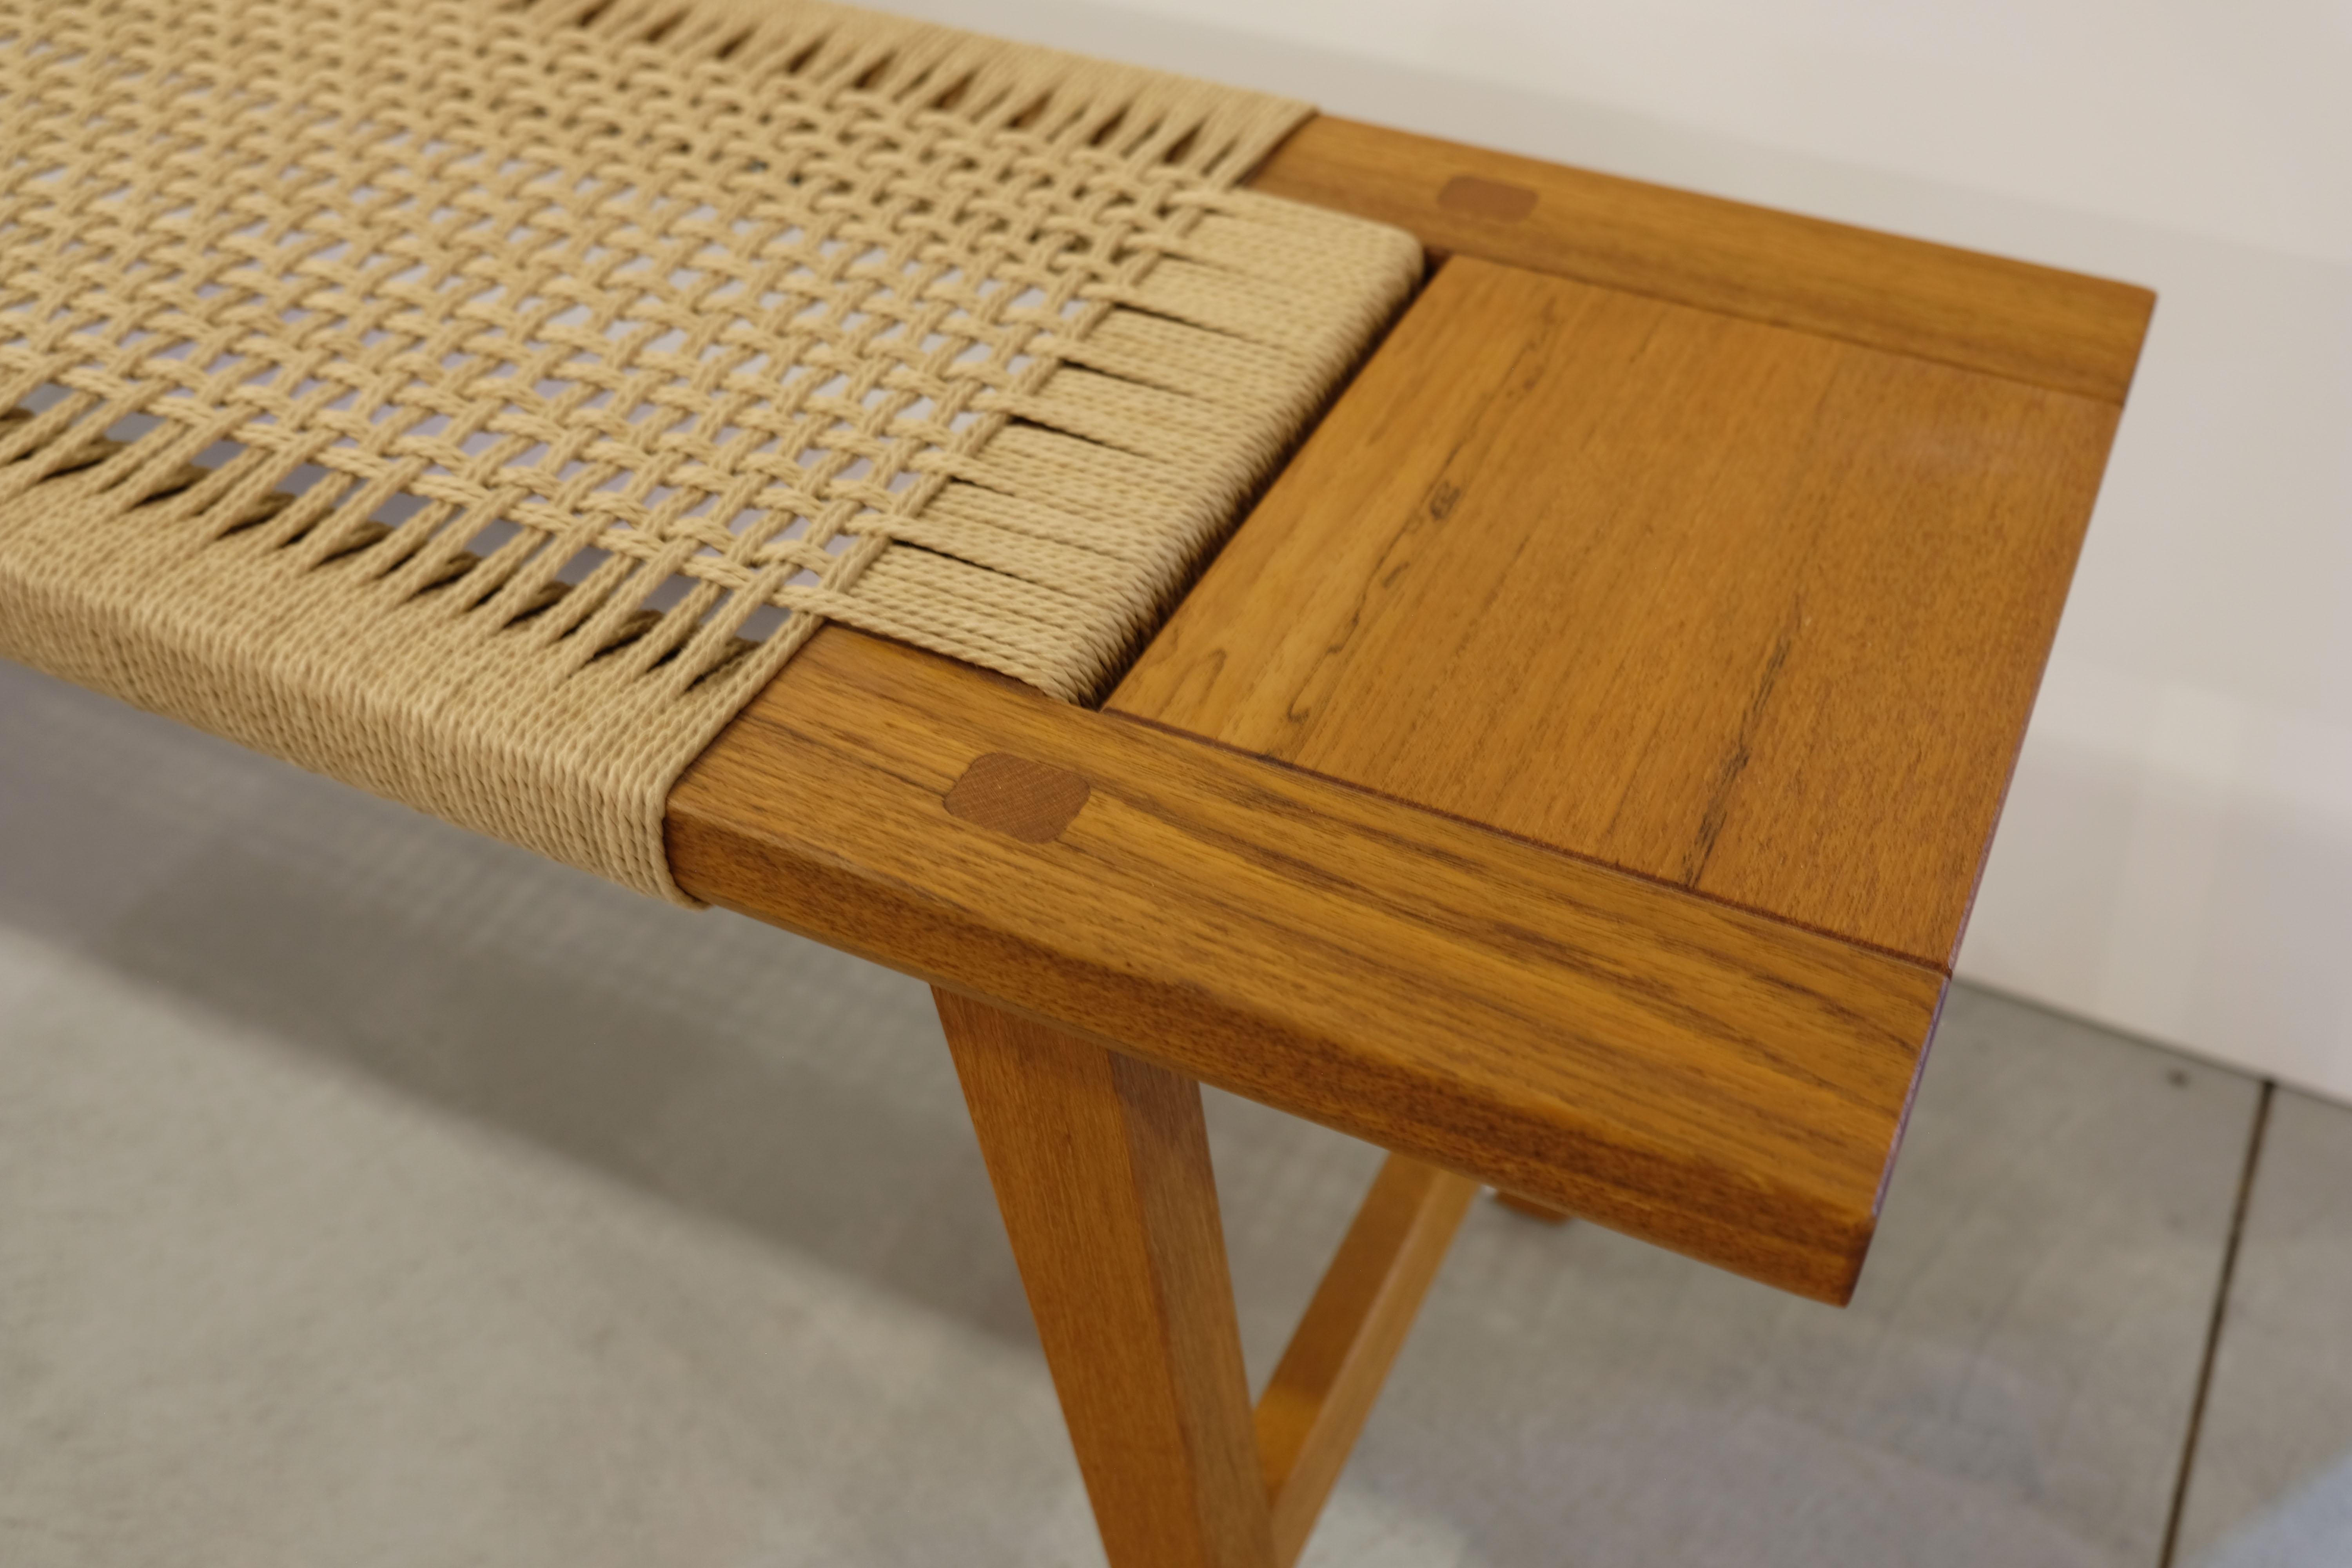 Incredible craftsmanship shines in this hand rushed woven teak bench.